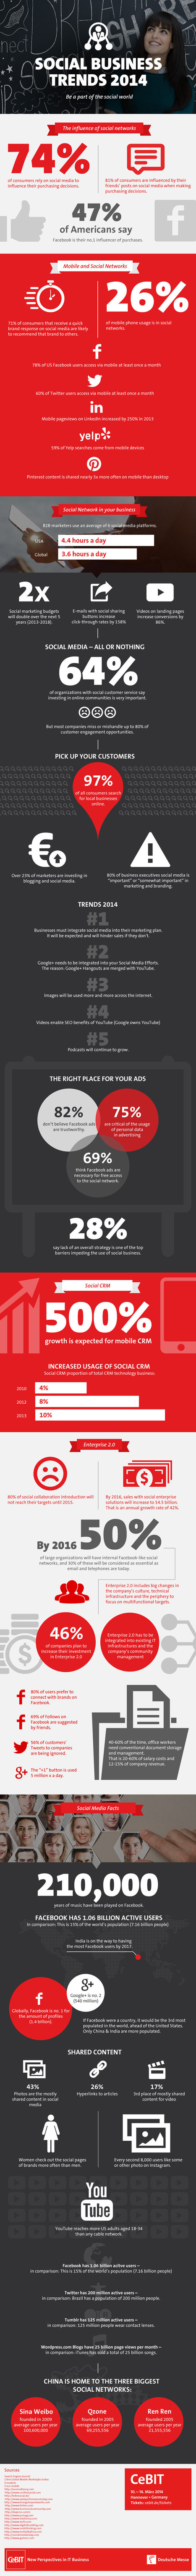 Social Business Trends 2014 [INFOGRAPHIC] | Information Technology & Social Media News | Scoop.it